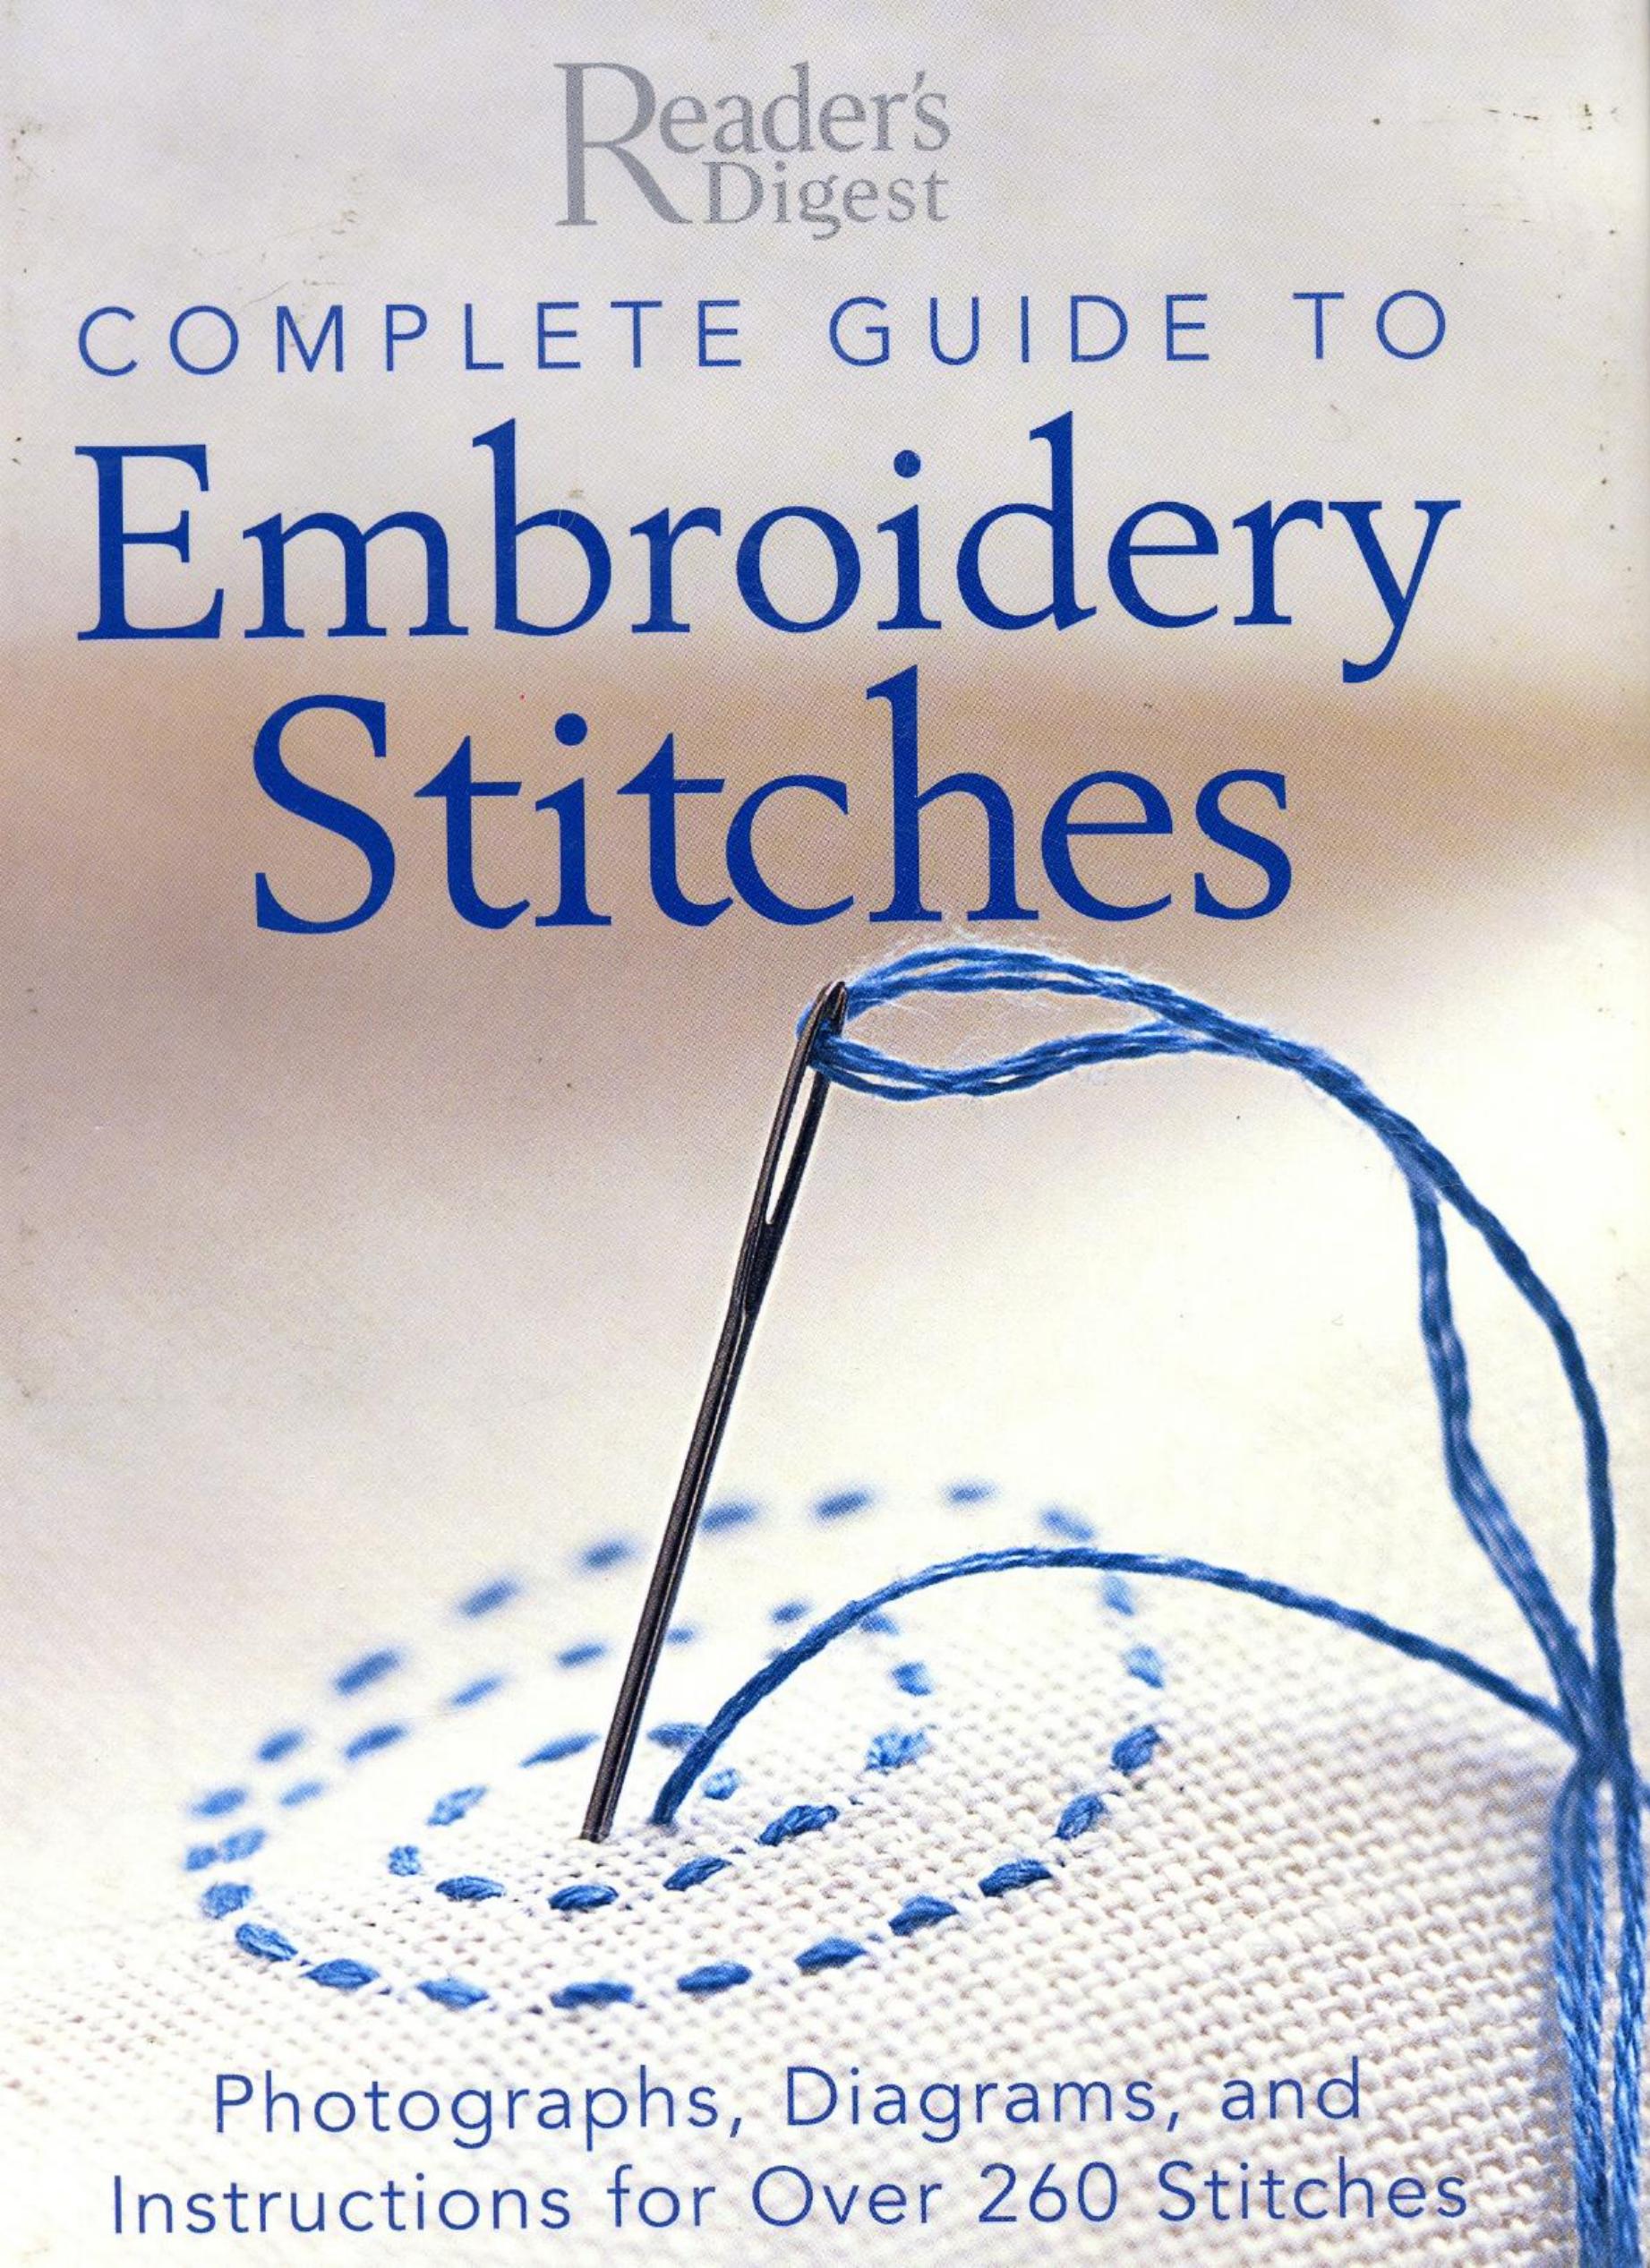 Complete Guide to Embroidery Stitches: Photographs, Diagrams, and Instructions for Over 260 Stitches by Jennifer Campbell